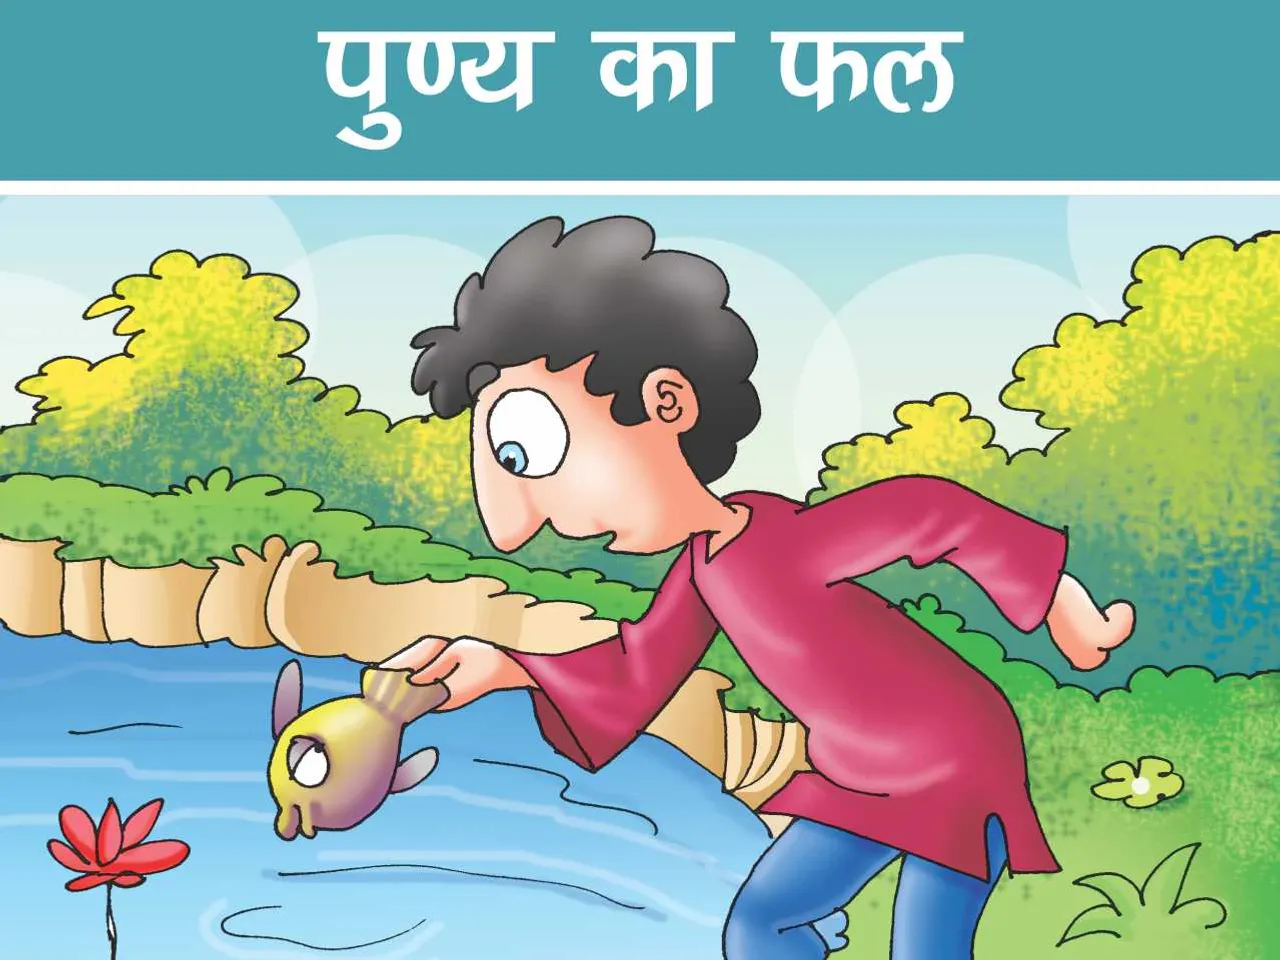 Boy with Fish in hand cartoon image